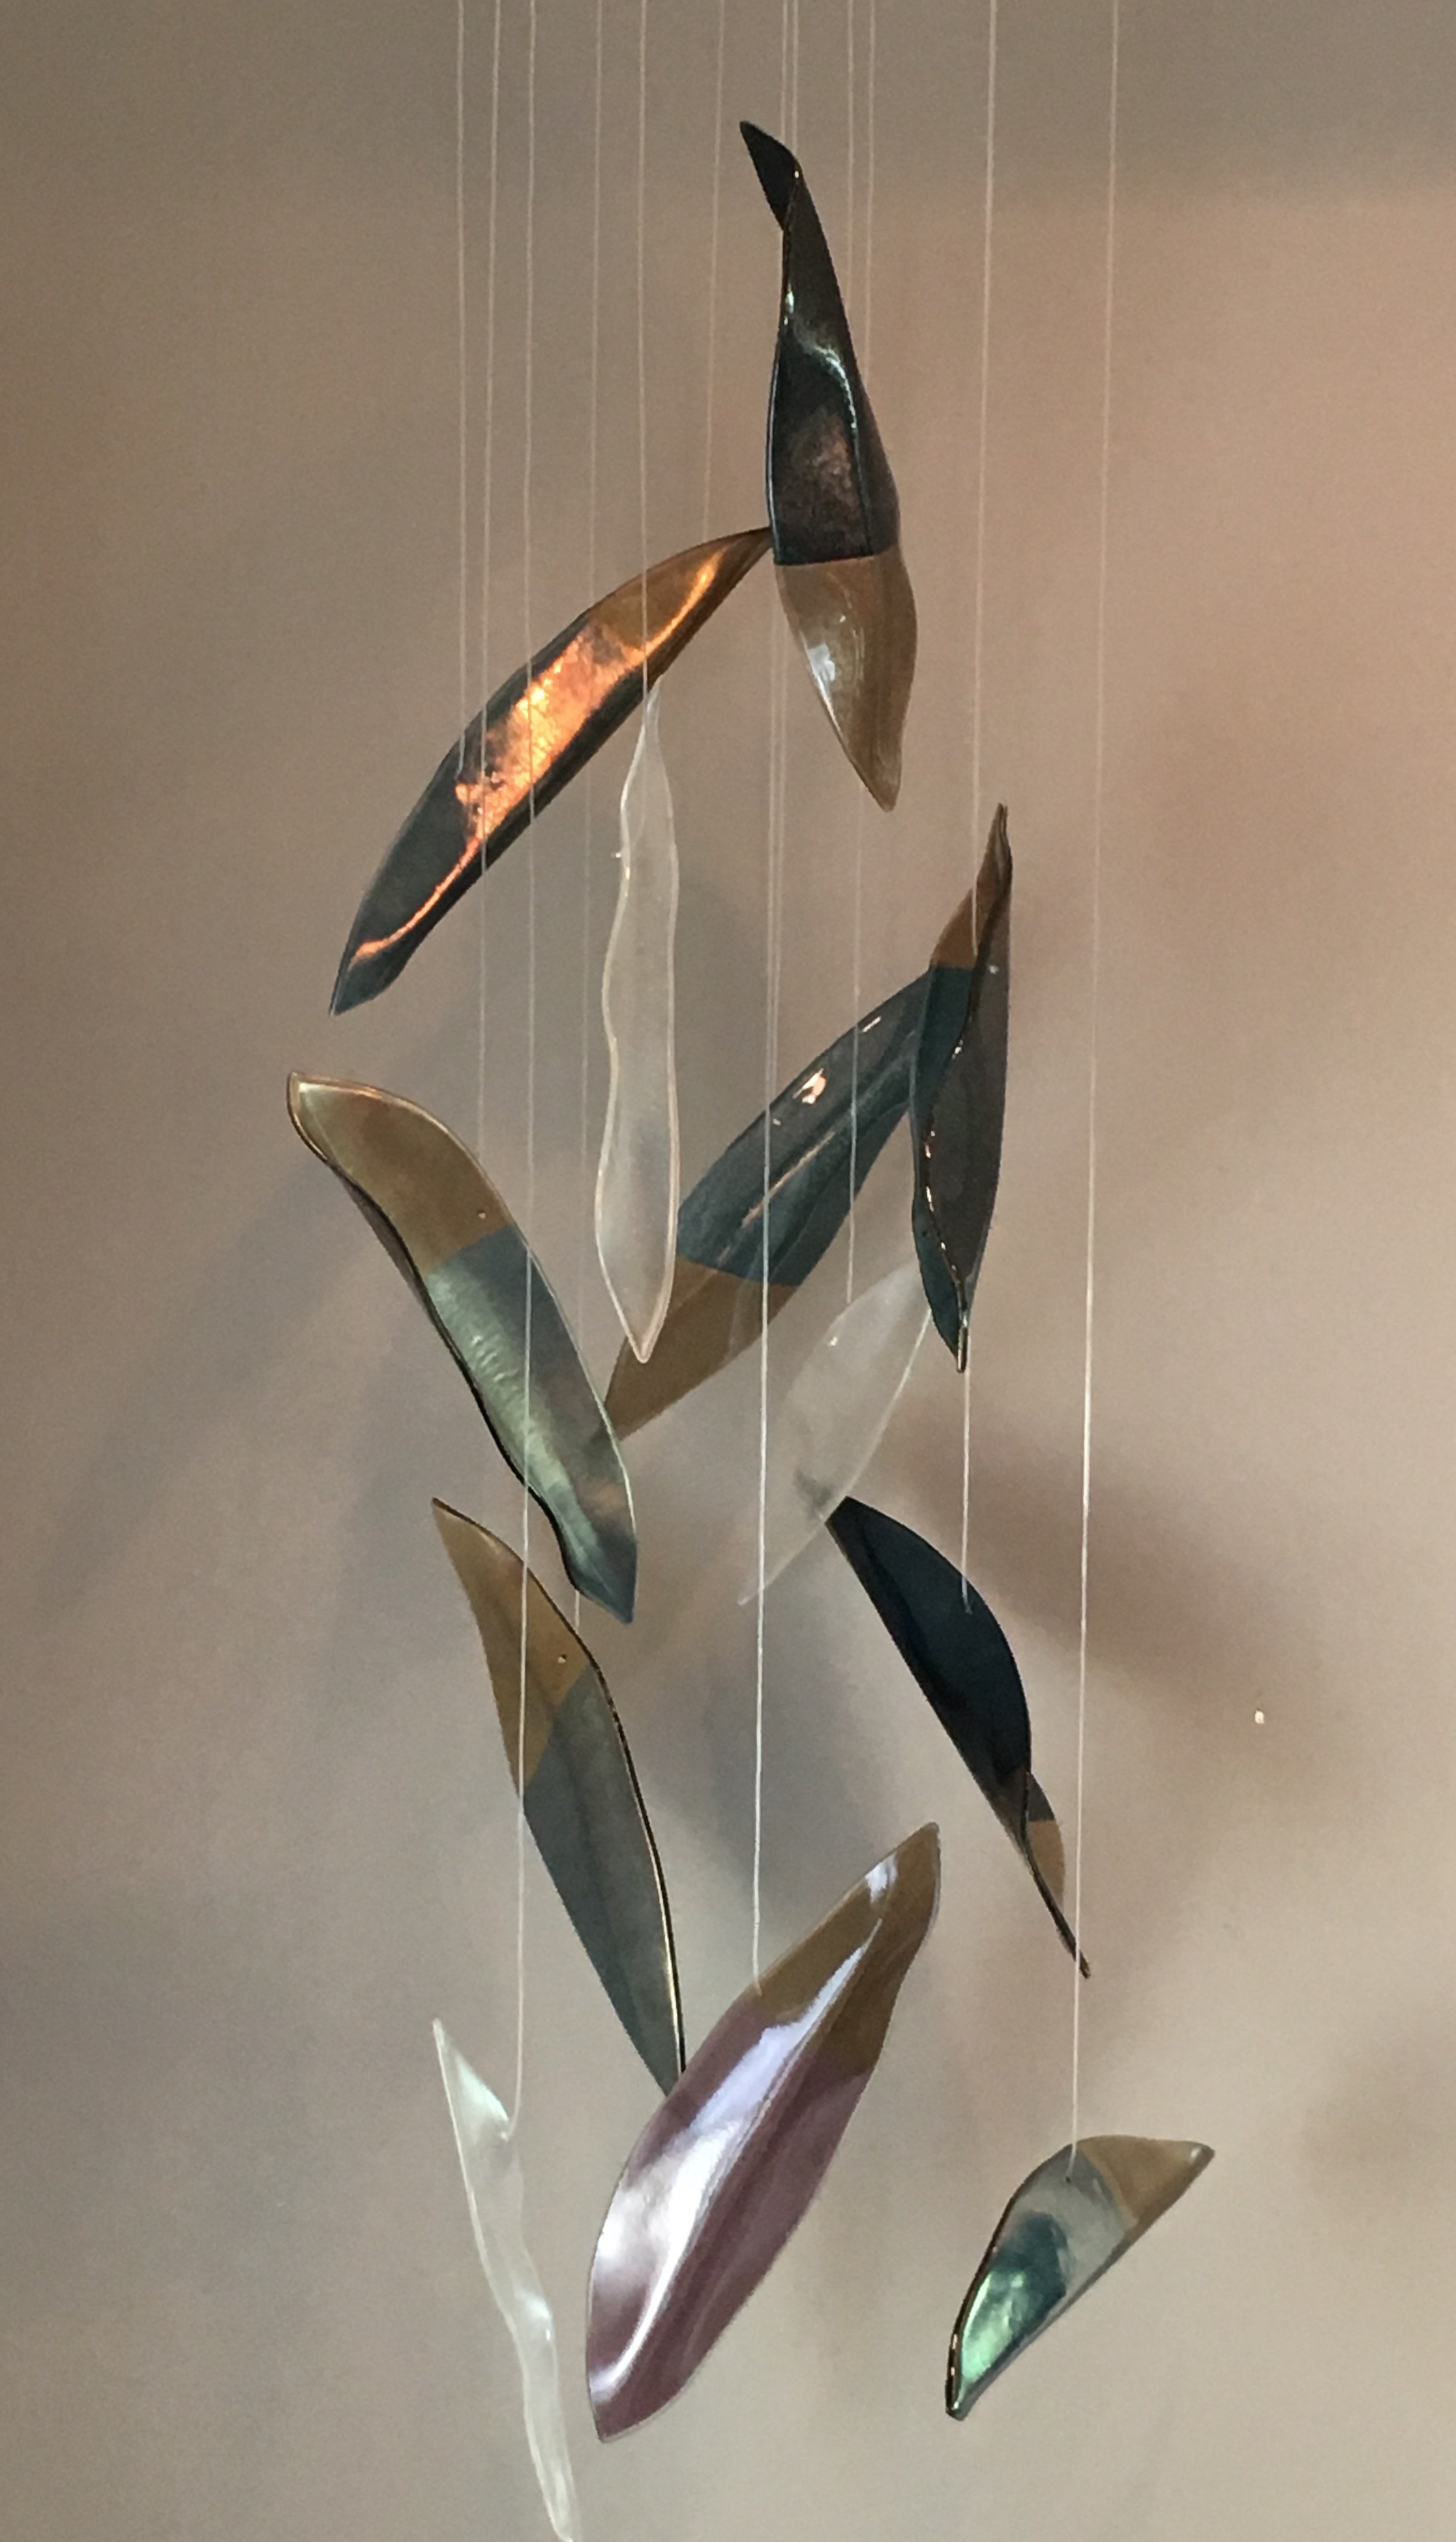 Long Way Home - Twelve-piece aerial glass sculpture. Available for sale. Custom orders welcome.